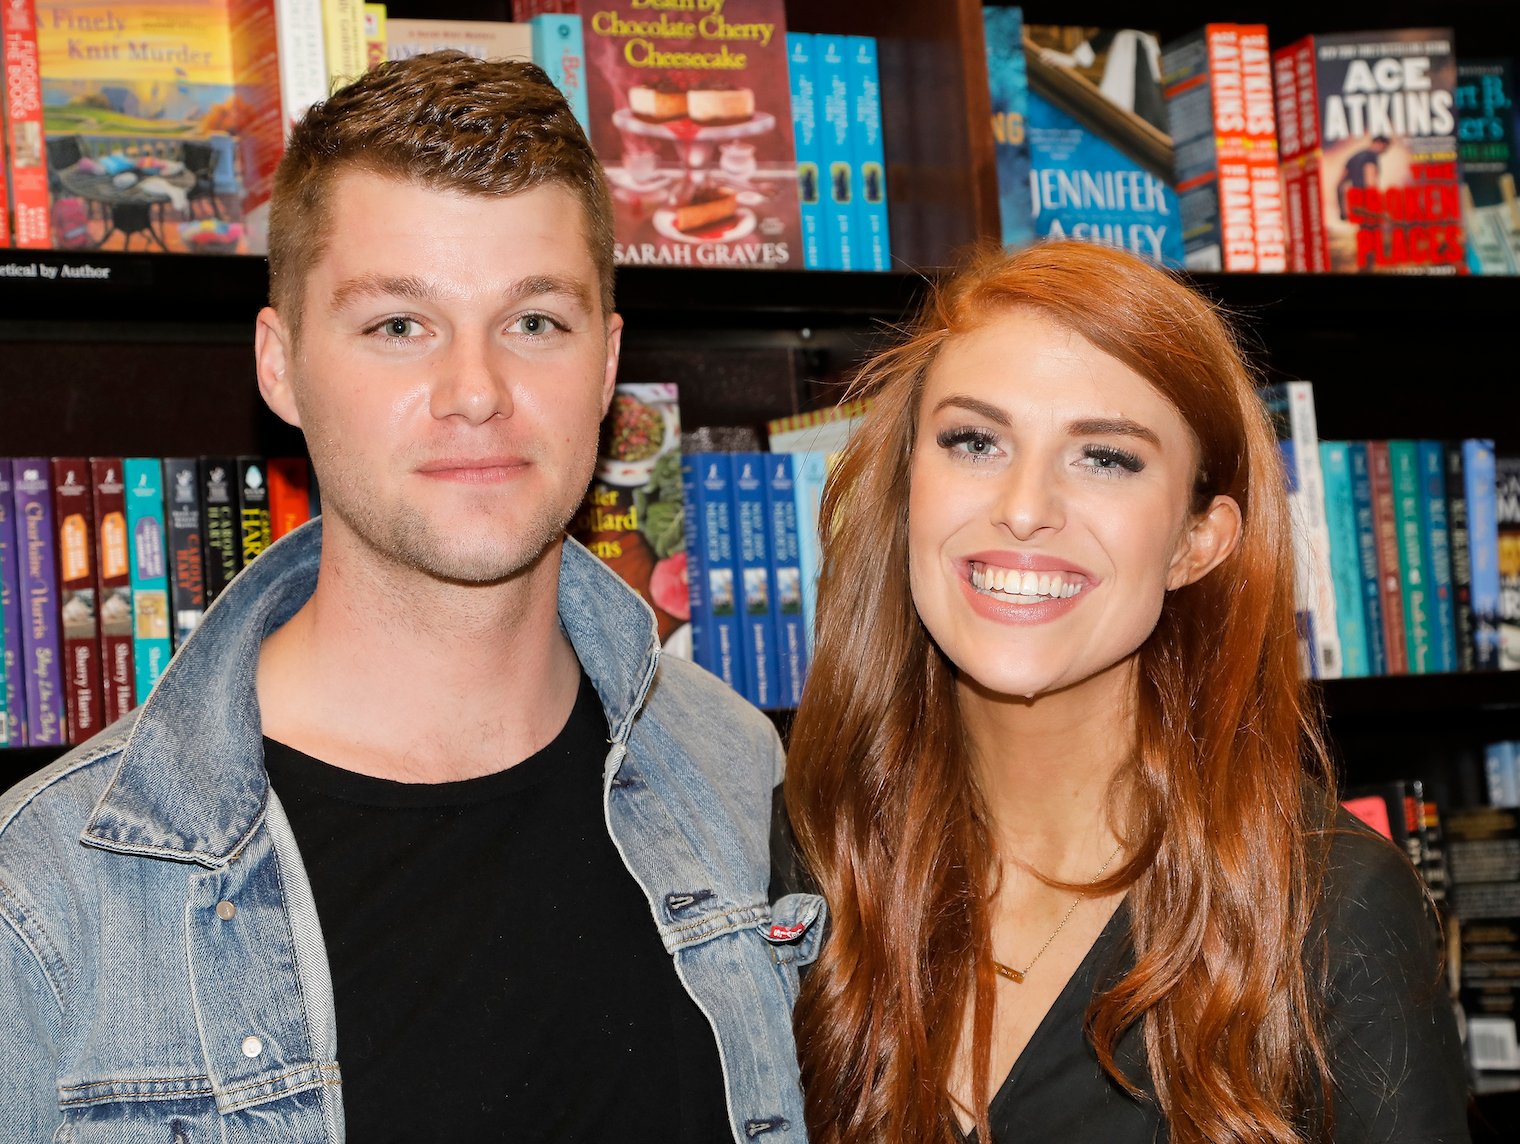 Jeremy and Audrey Roloff from 'Little People, Big World' smiling with books behind them